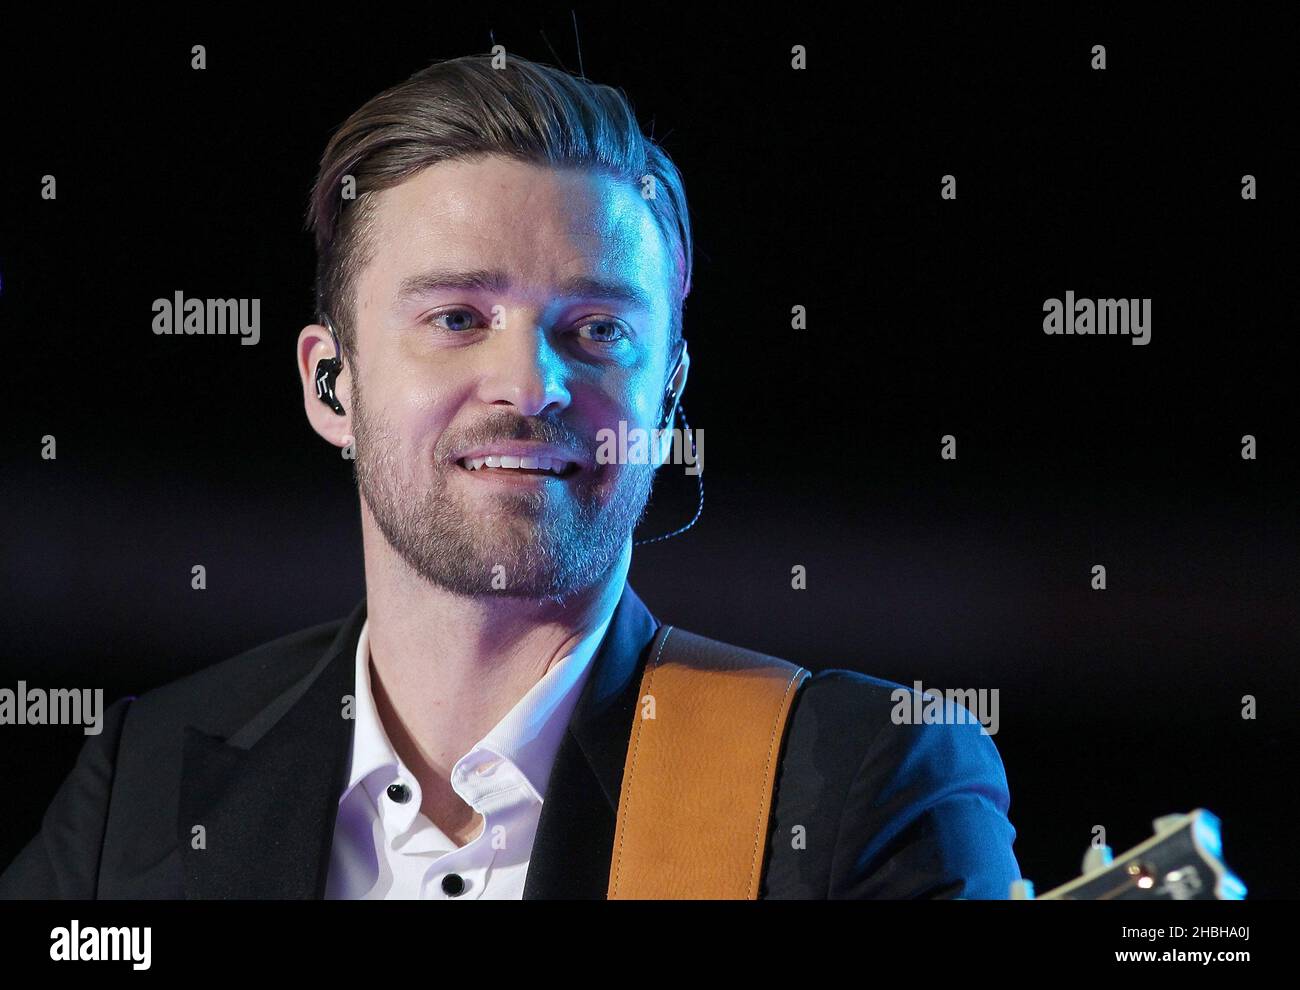 Justin Timberlake performs on stage at Capital FM's Summertime Ball at Wembley Stadium, London. Stock Photo